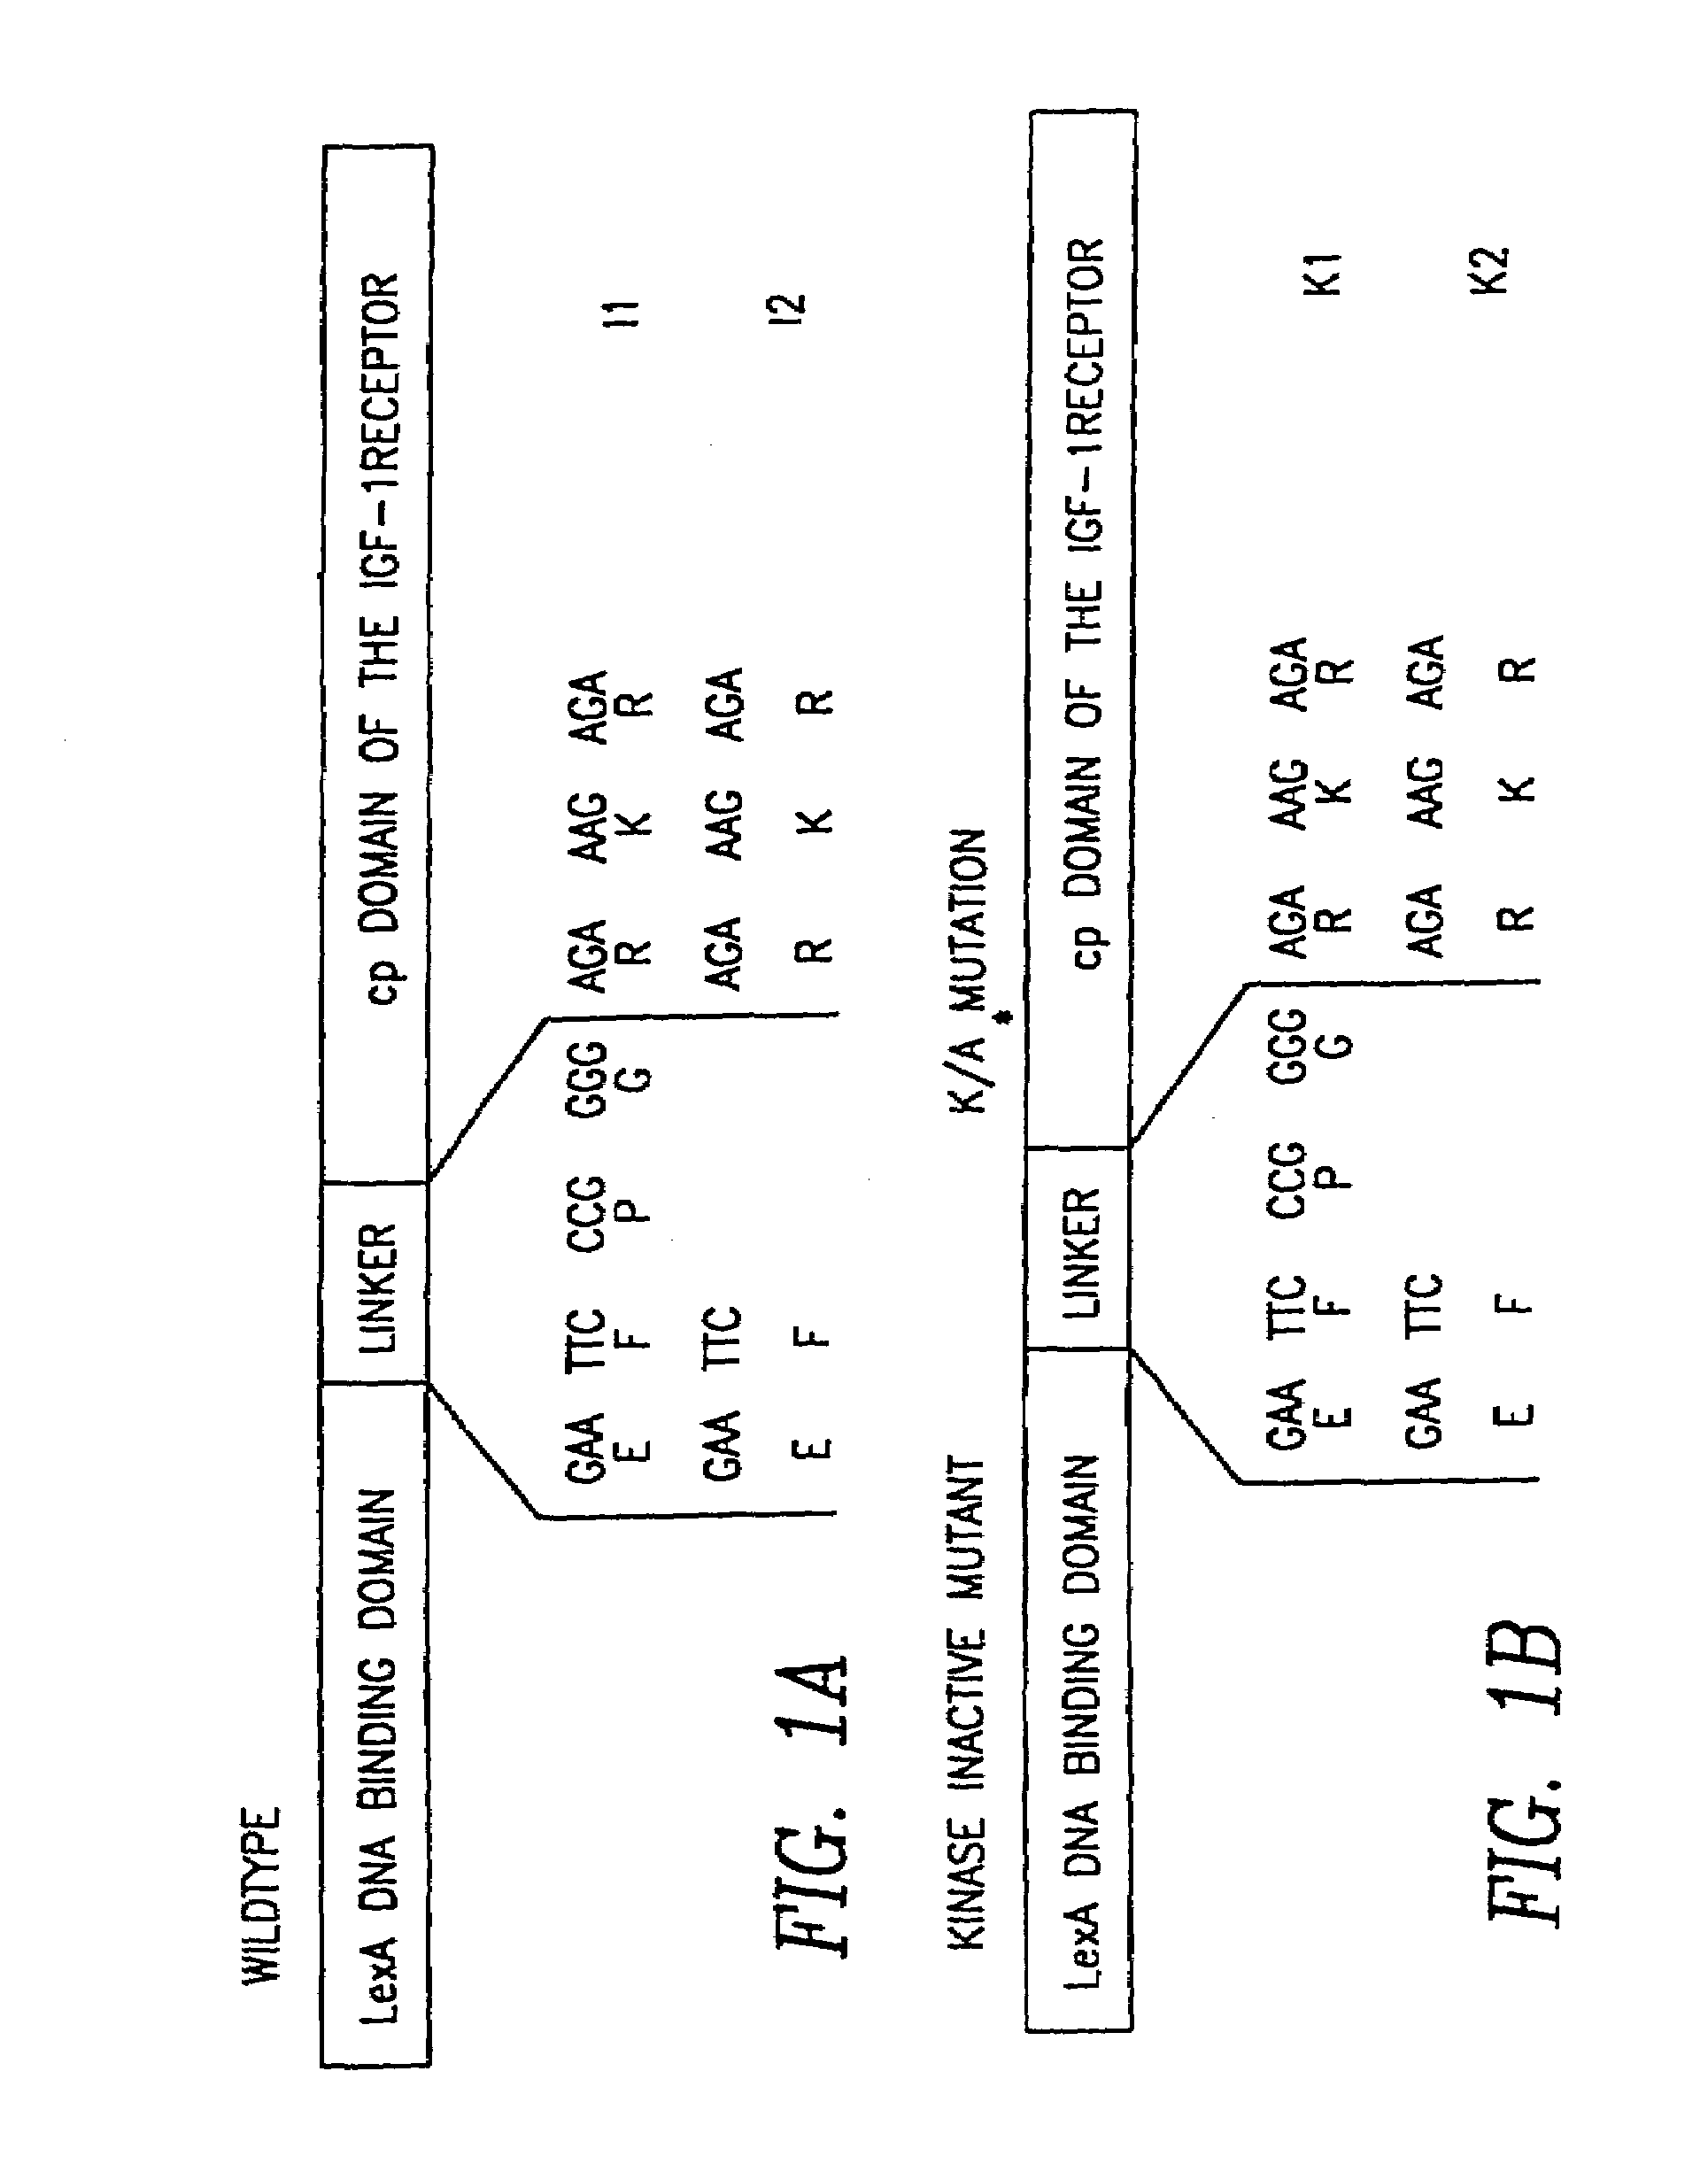 Methods for detecting cancer cells by using nucleic acid encoding for IGF-1 receptor interacting proteins